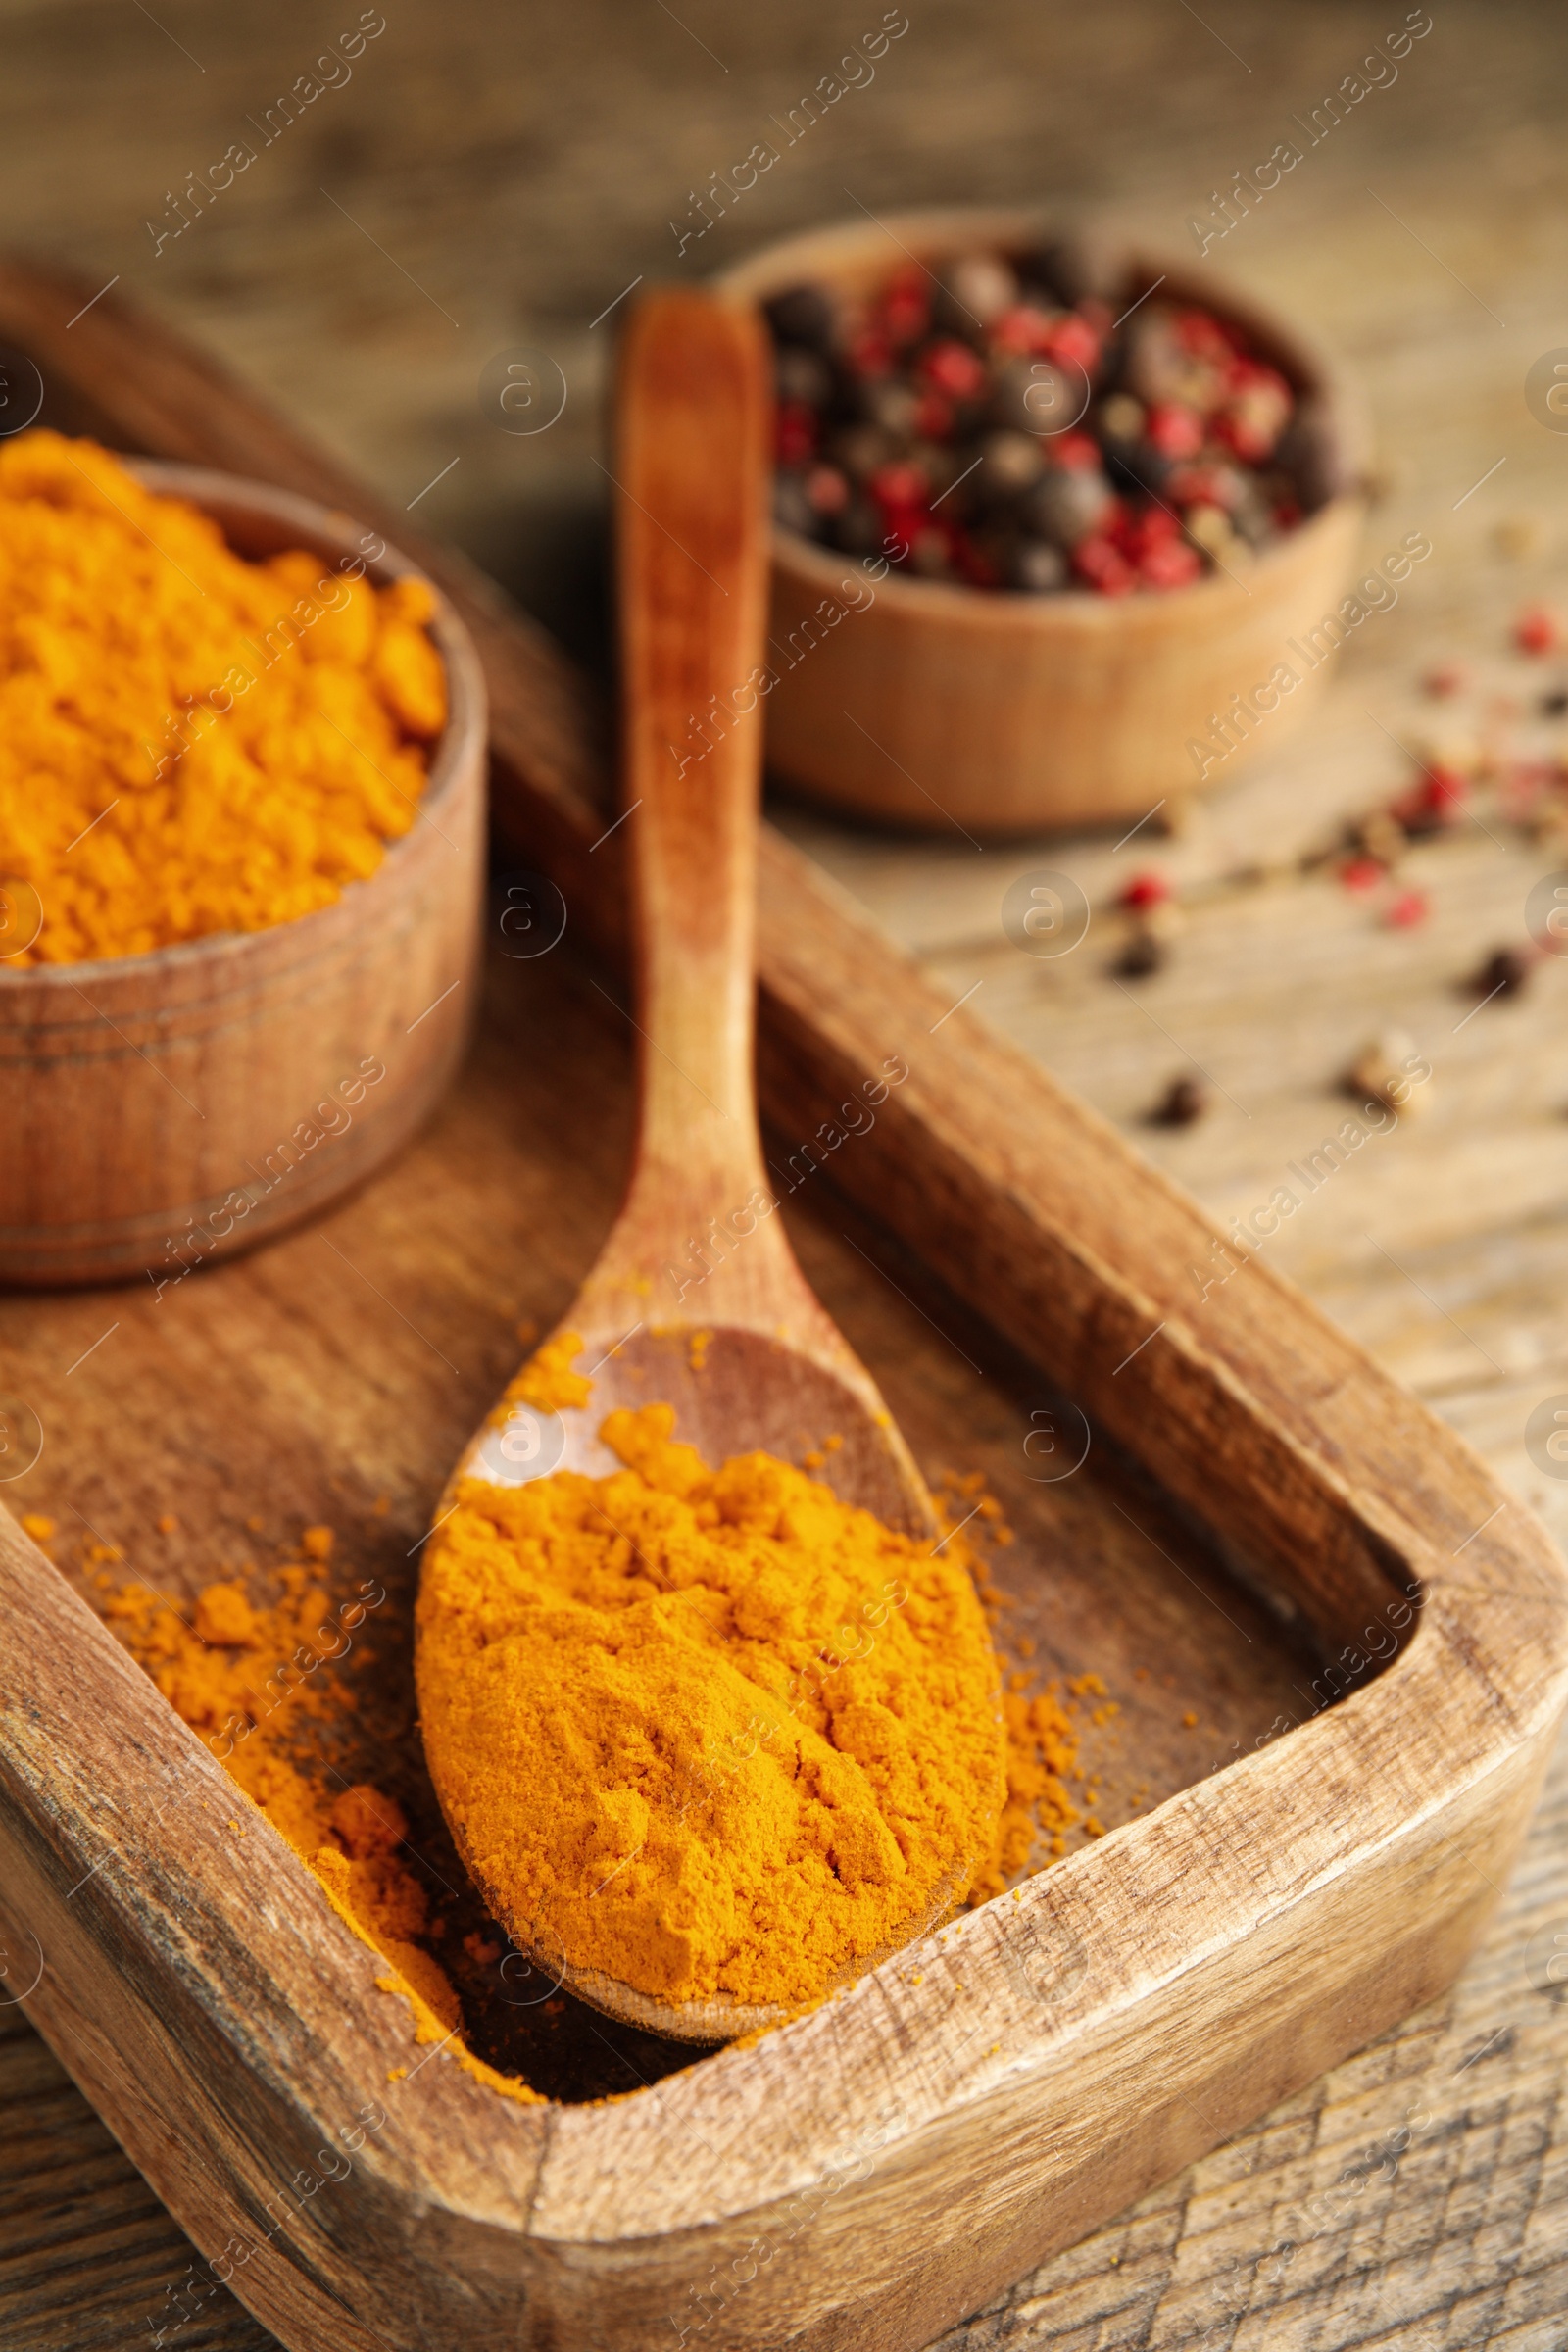 Photo of Spoon and bowl with saffron powder on wooden table